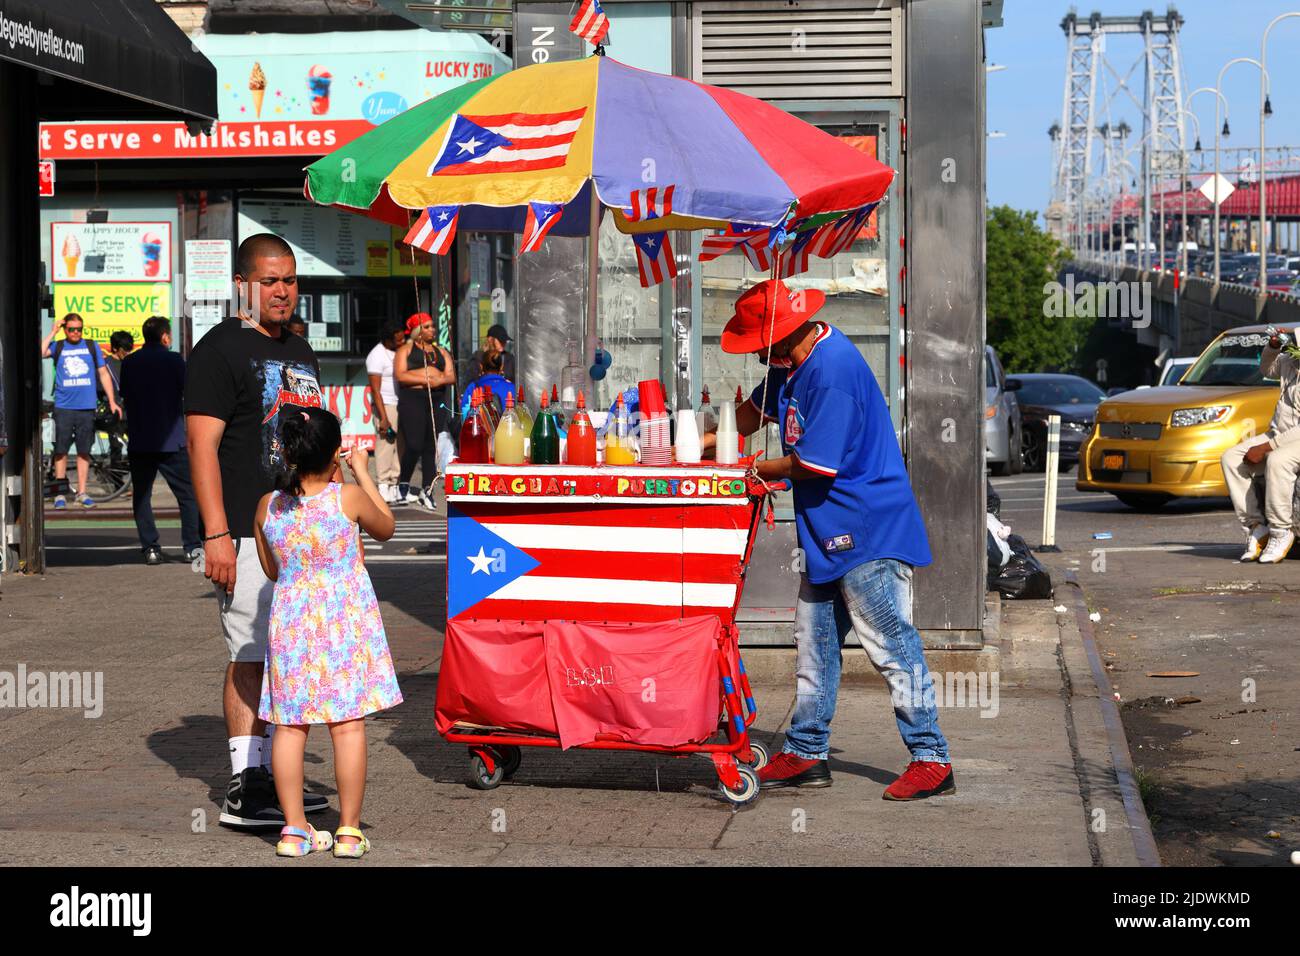 People buying piragua shaved ice from a street vendor with a colorful cart adorned with flags of Puerto Rico in Manhattan's Lower East Side, New York Stock Photo